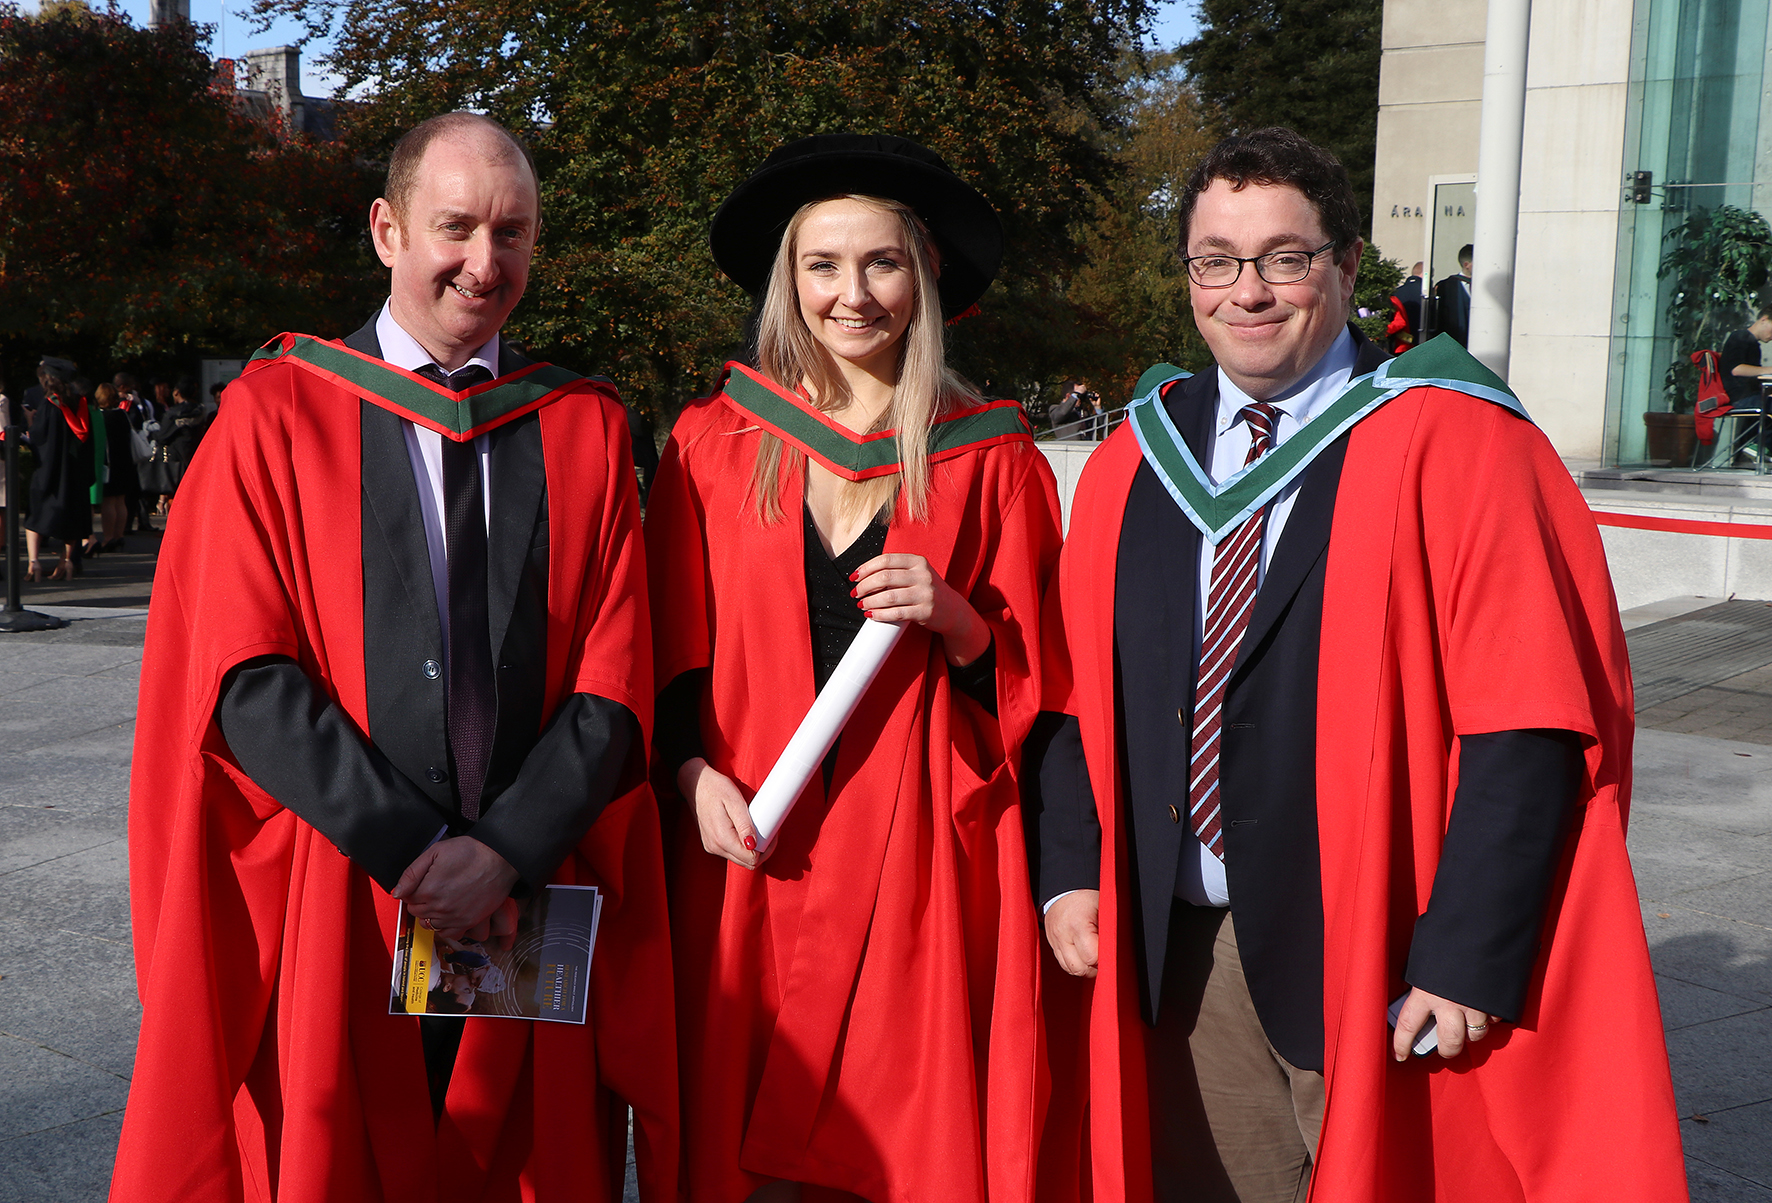 Hons BSc Neuroscience Graduate Katie Togher is conferred with PhD in Neuroscience